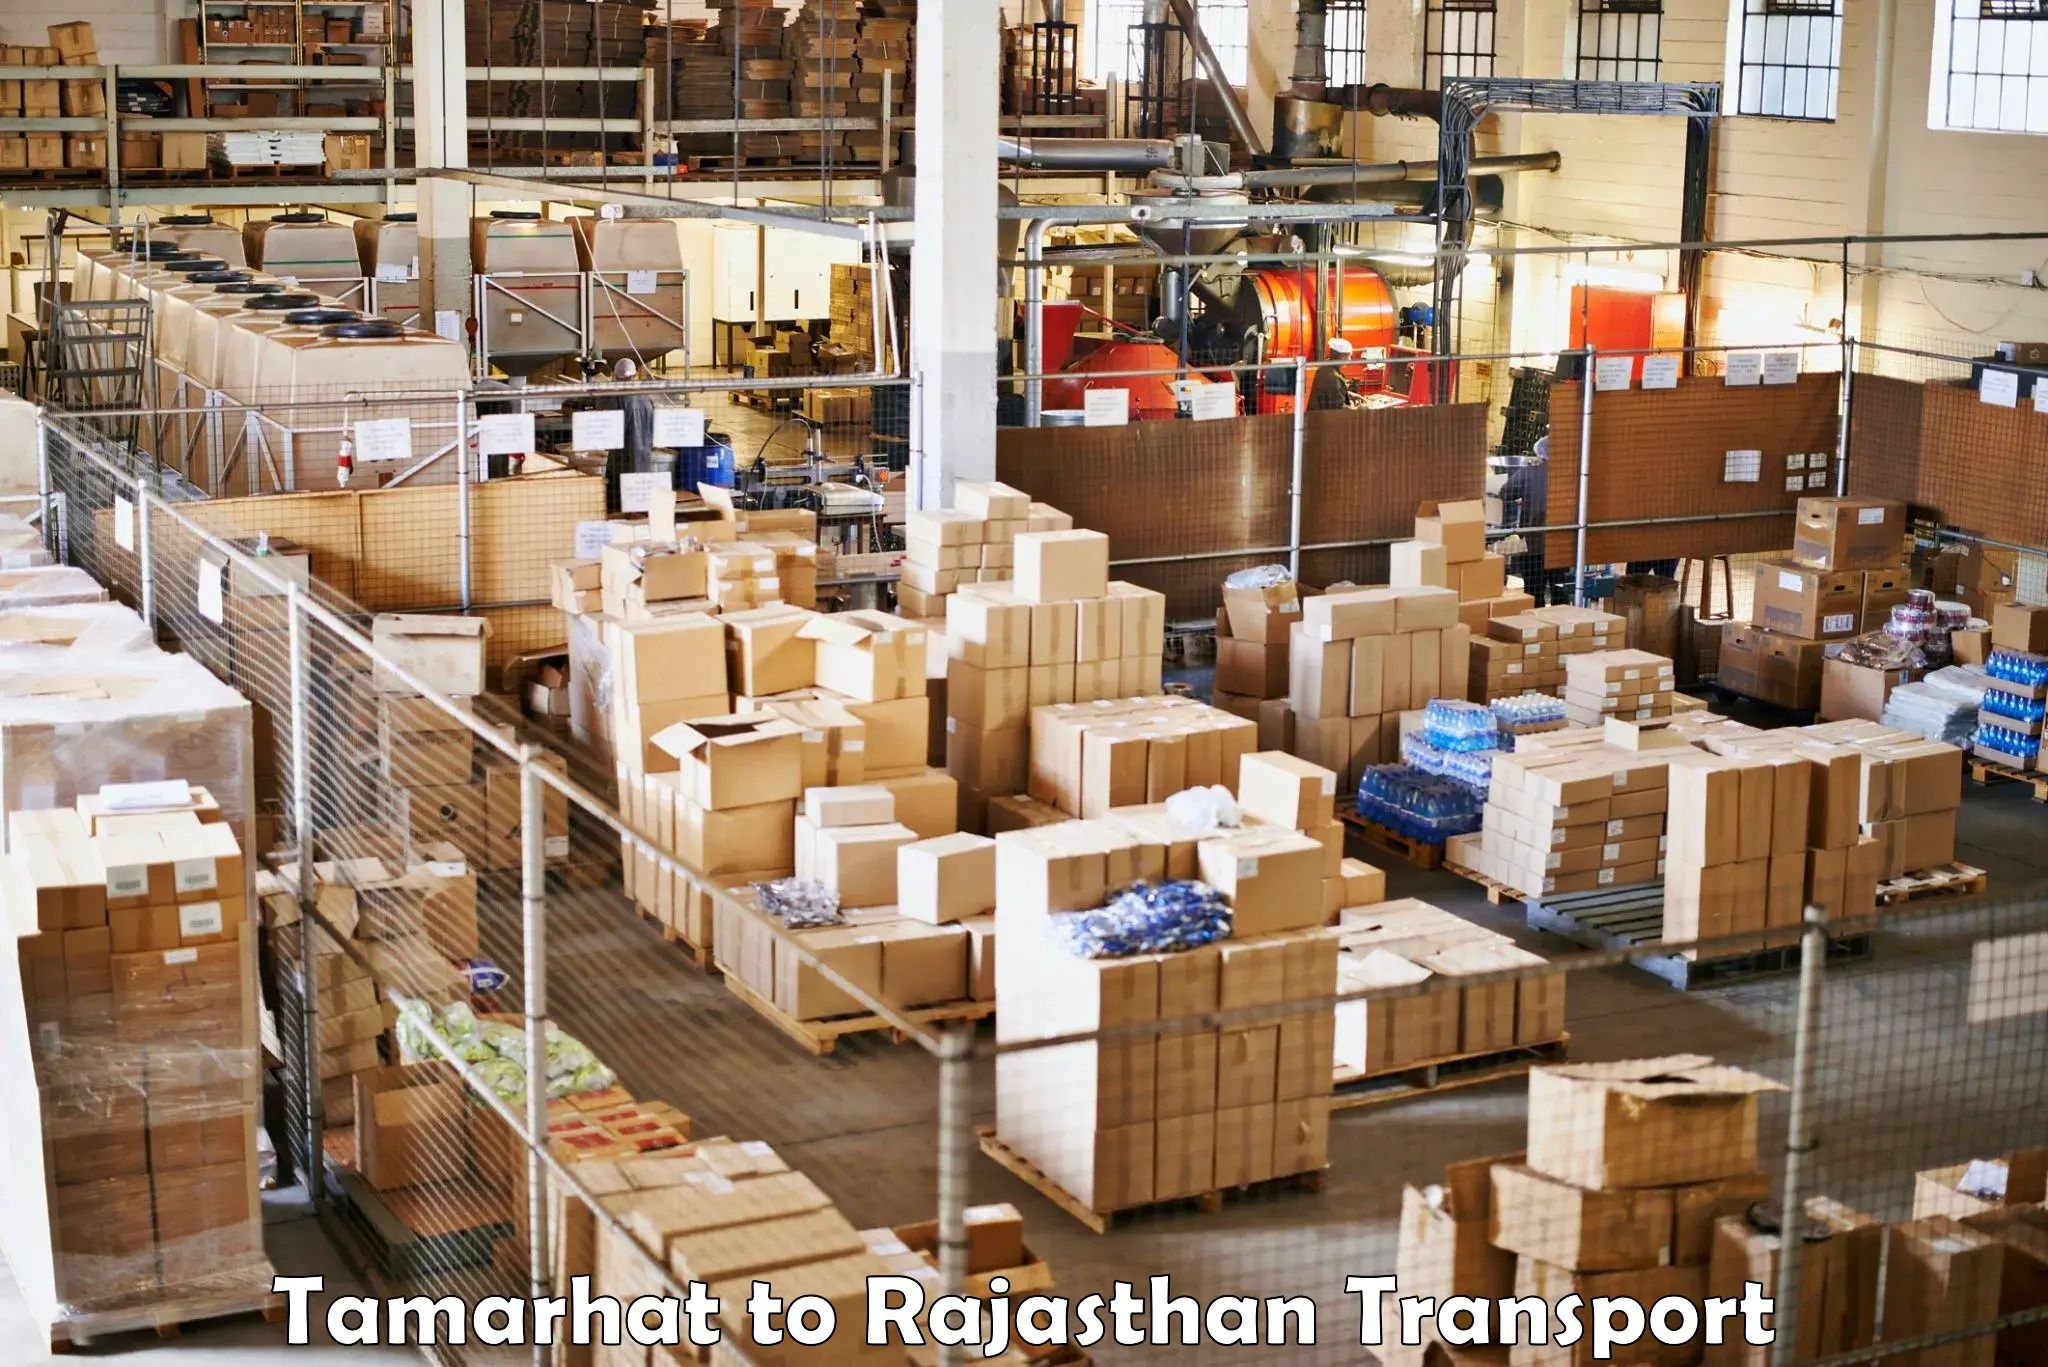 Air freight transport services Tamarhat to Rajasthan